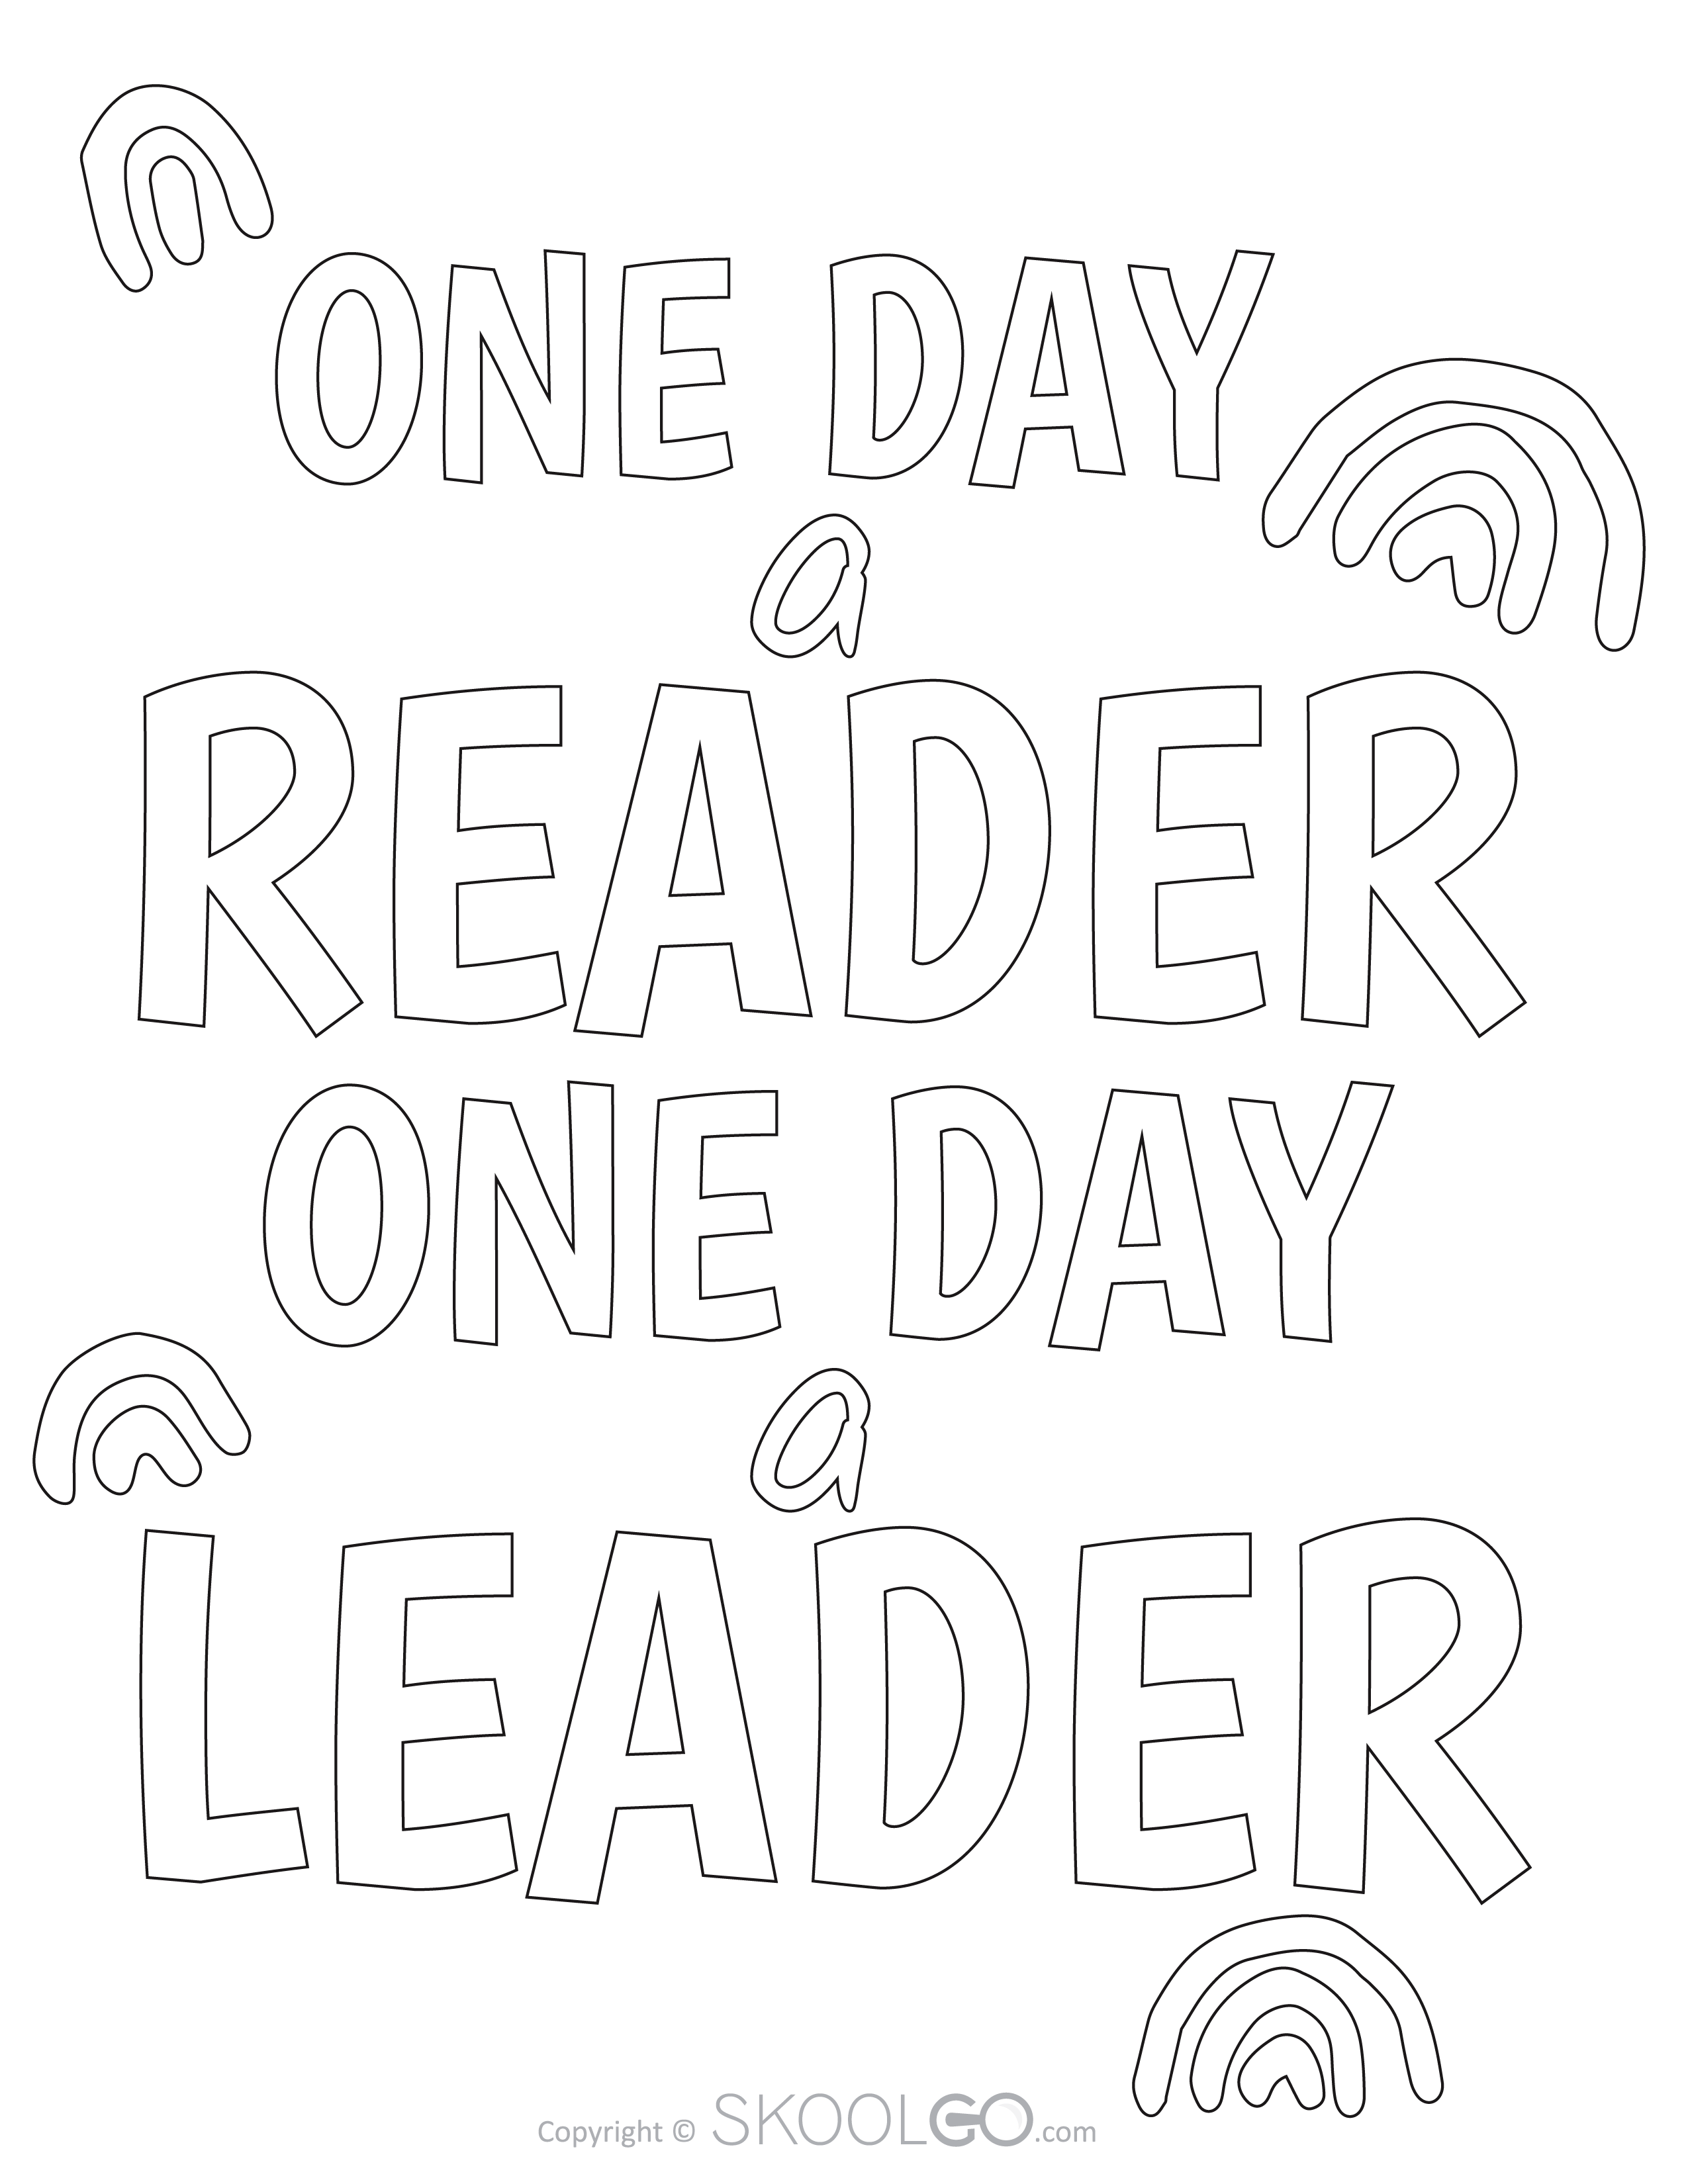 One Day A Reader One Day A Leader - Free Coloring Version Poster